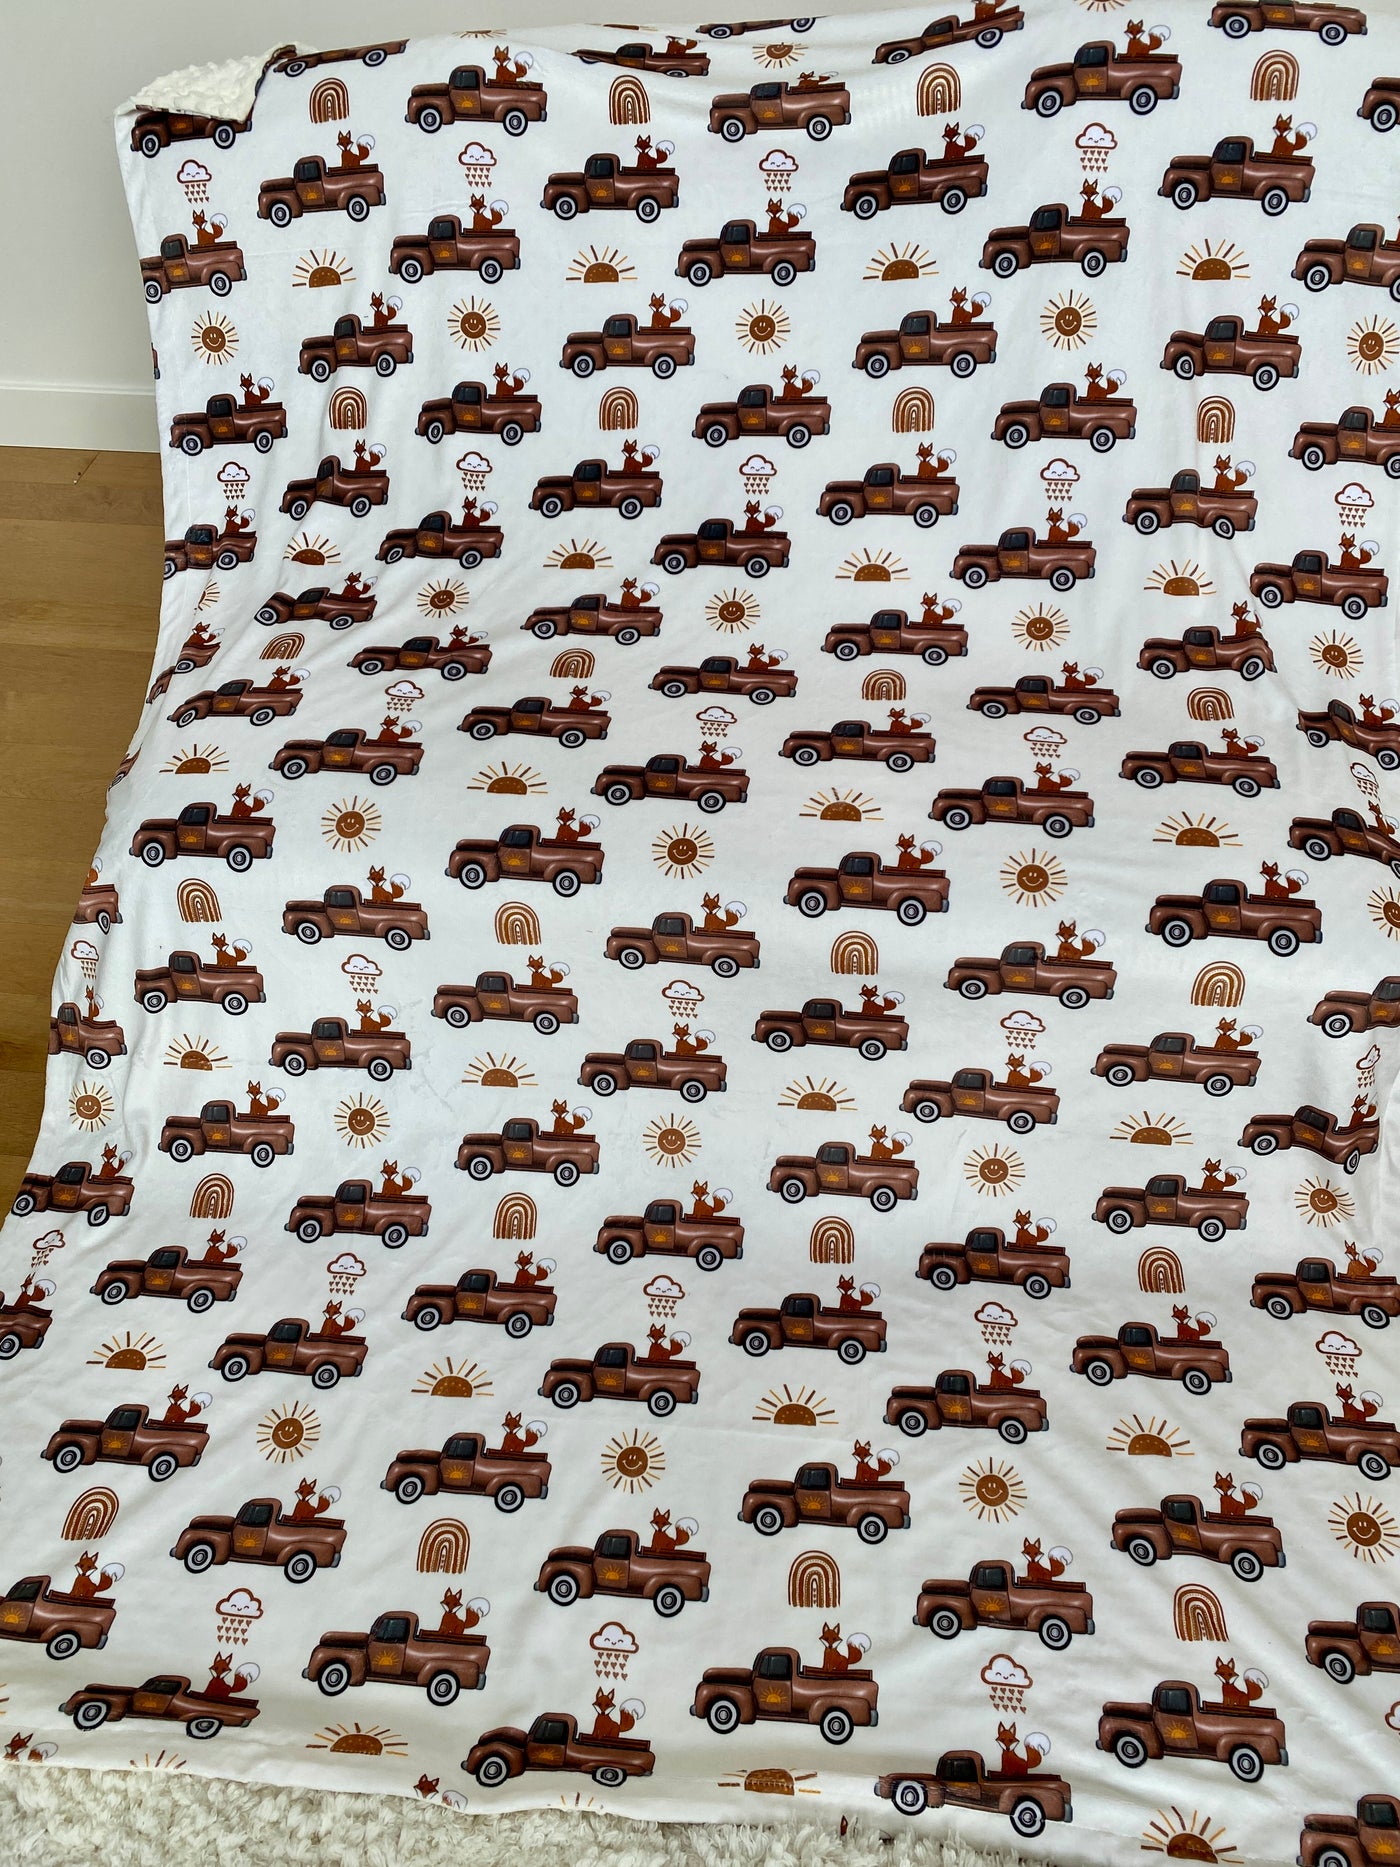 Giant Blanket: Vintage Trucks and Foxes